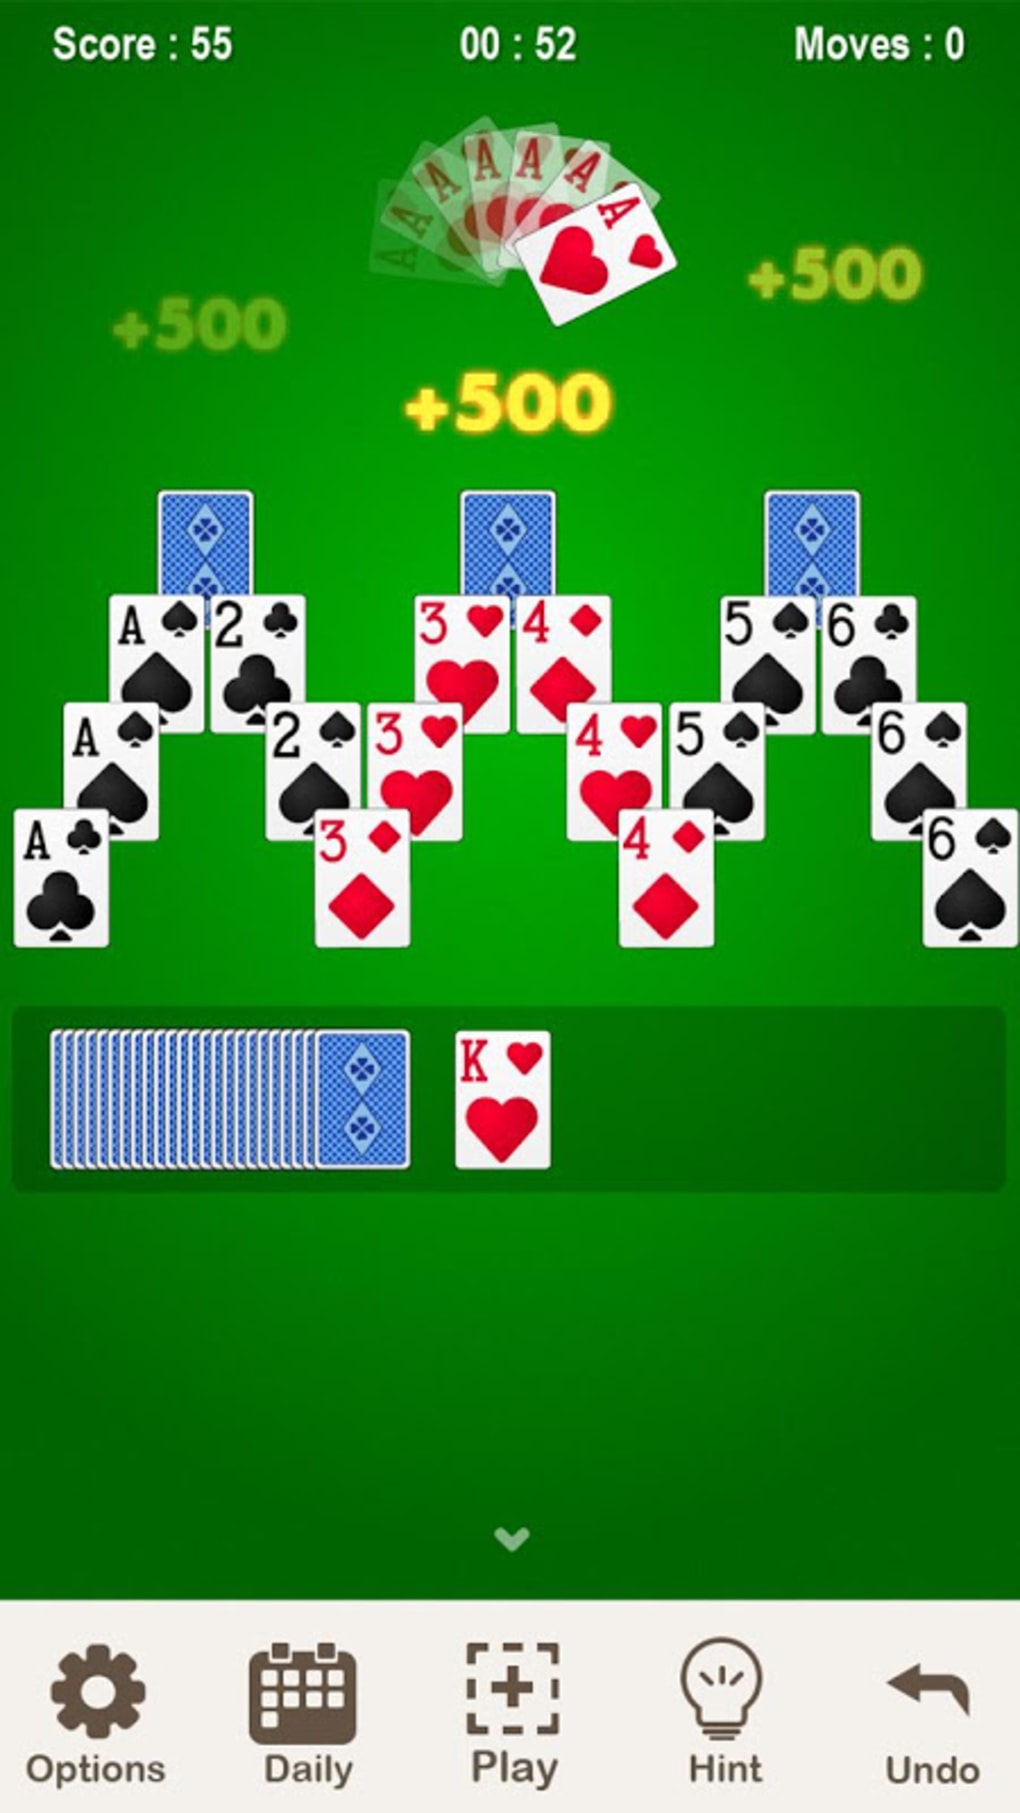 free tripeaks solitaire download for vista